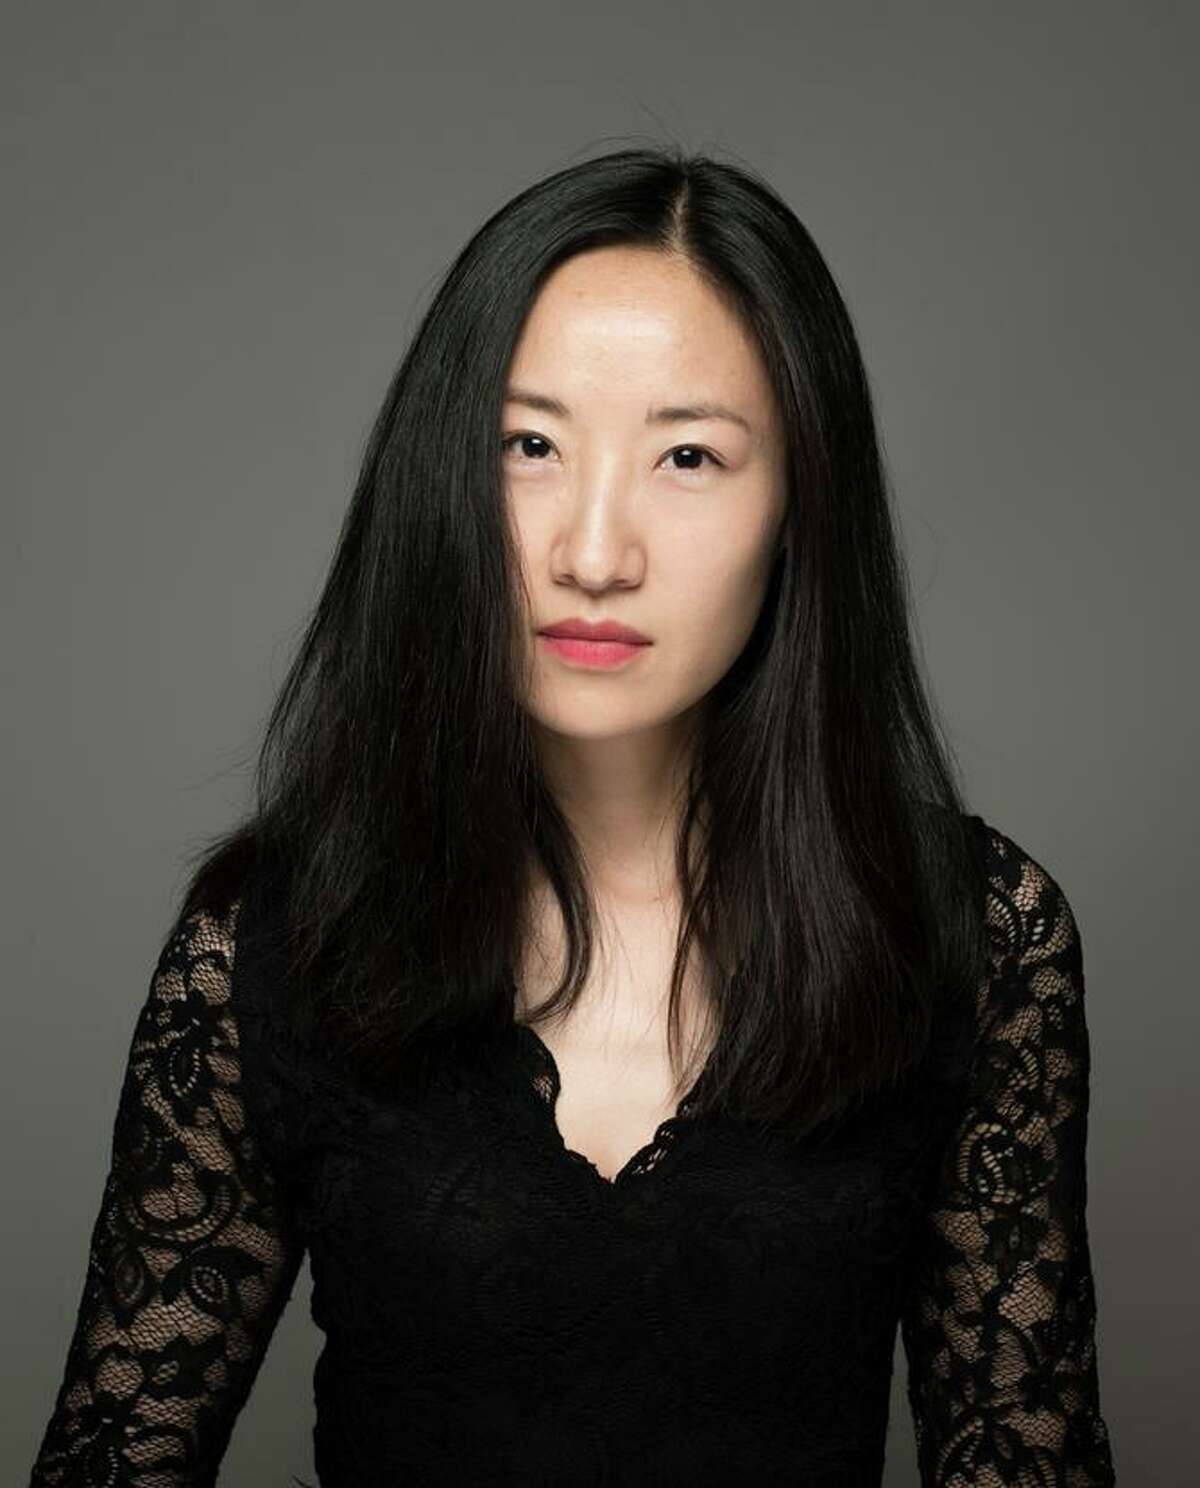 Yan Shen will be among the artists featured during the Lone Star College-CyFair Contemporary Music Festival on May 5, 2022.